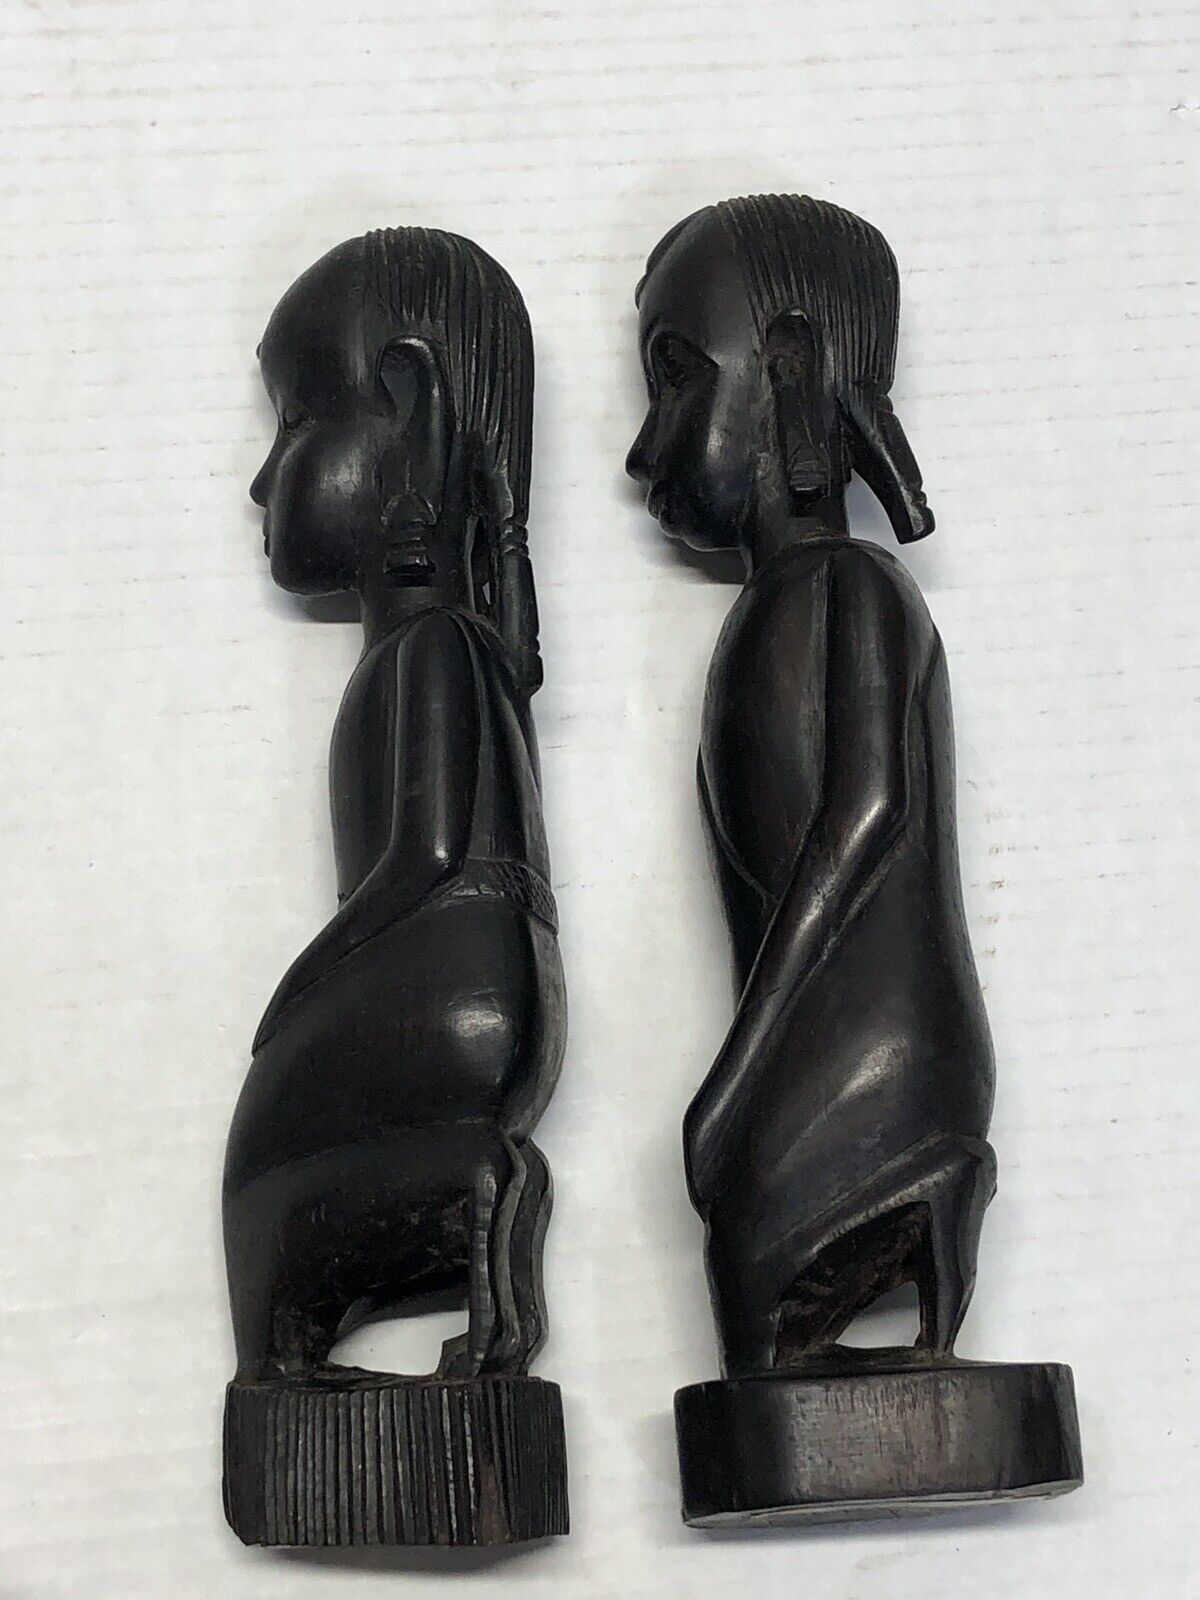 PAIR of AFRICAN EBONY CARVINGS HAND CARVED WOODEN WOOD STATUES AFRICA ART 10”